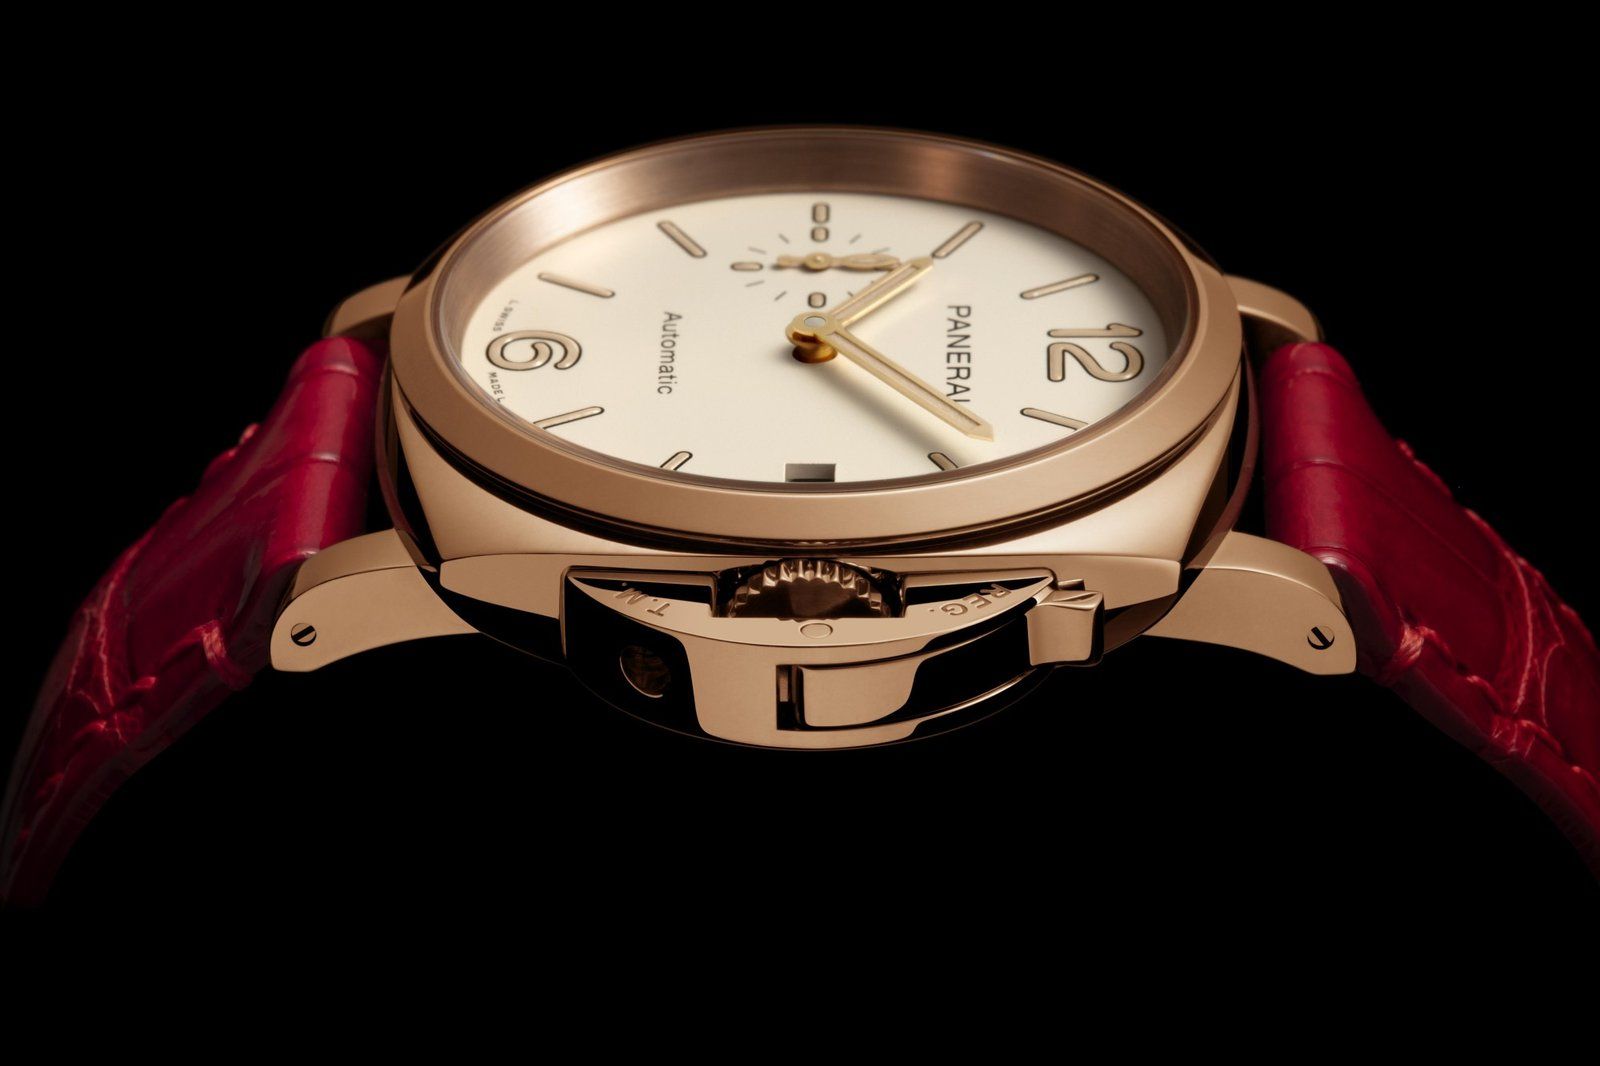 Celebrate the many shades of a woman with Panerai